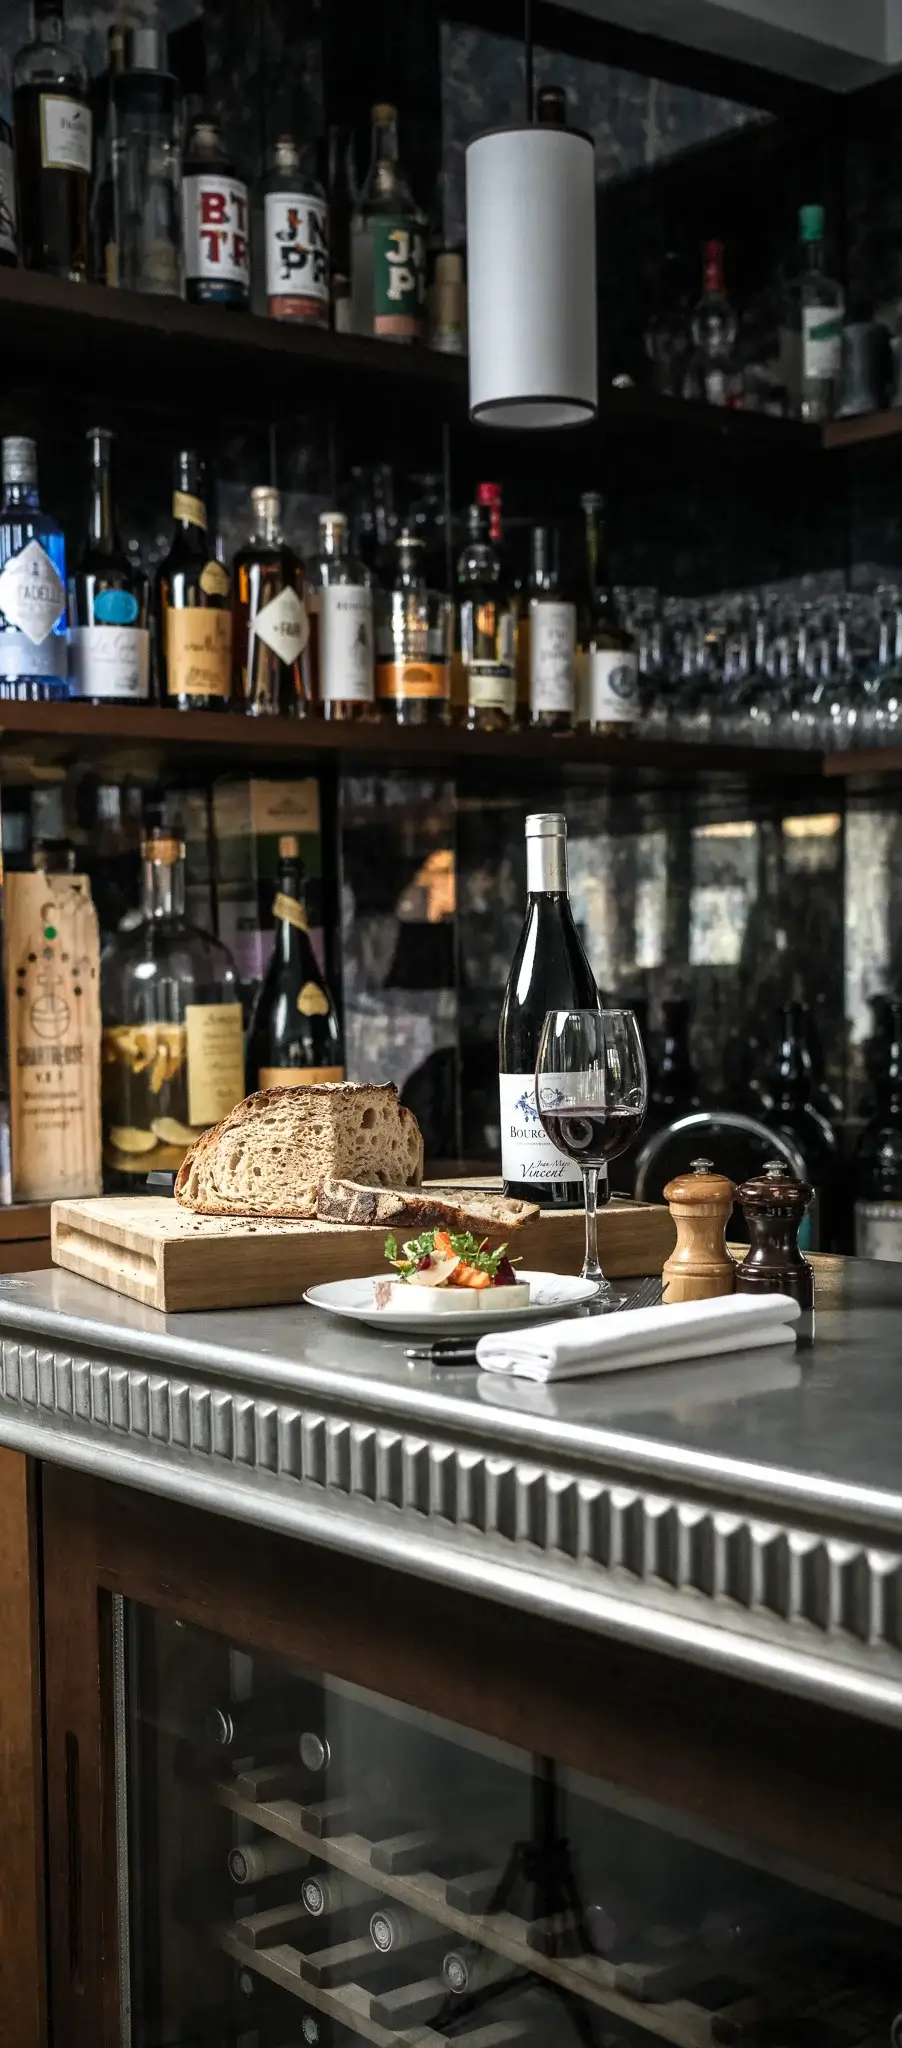 An intimate bar setting at Janine Bistro in Paris with a selection of liquors on shelves, freshly baked bread on a cutting board, and a glass of red wine in focus on the counter.